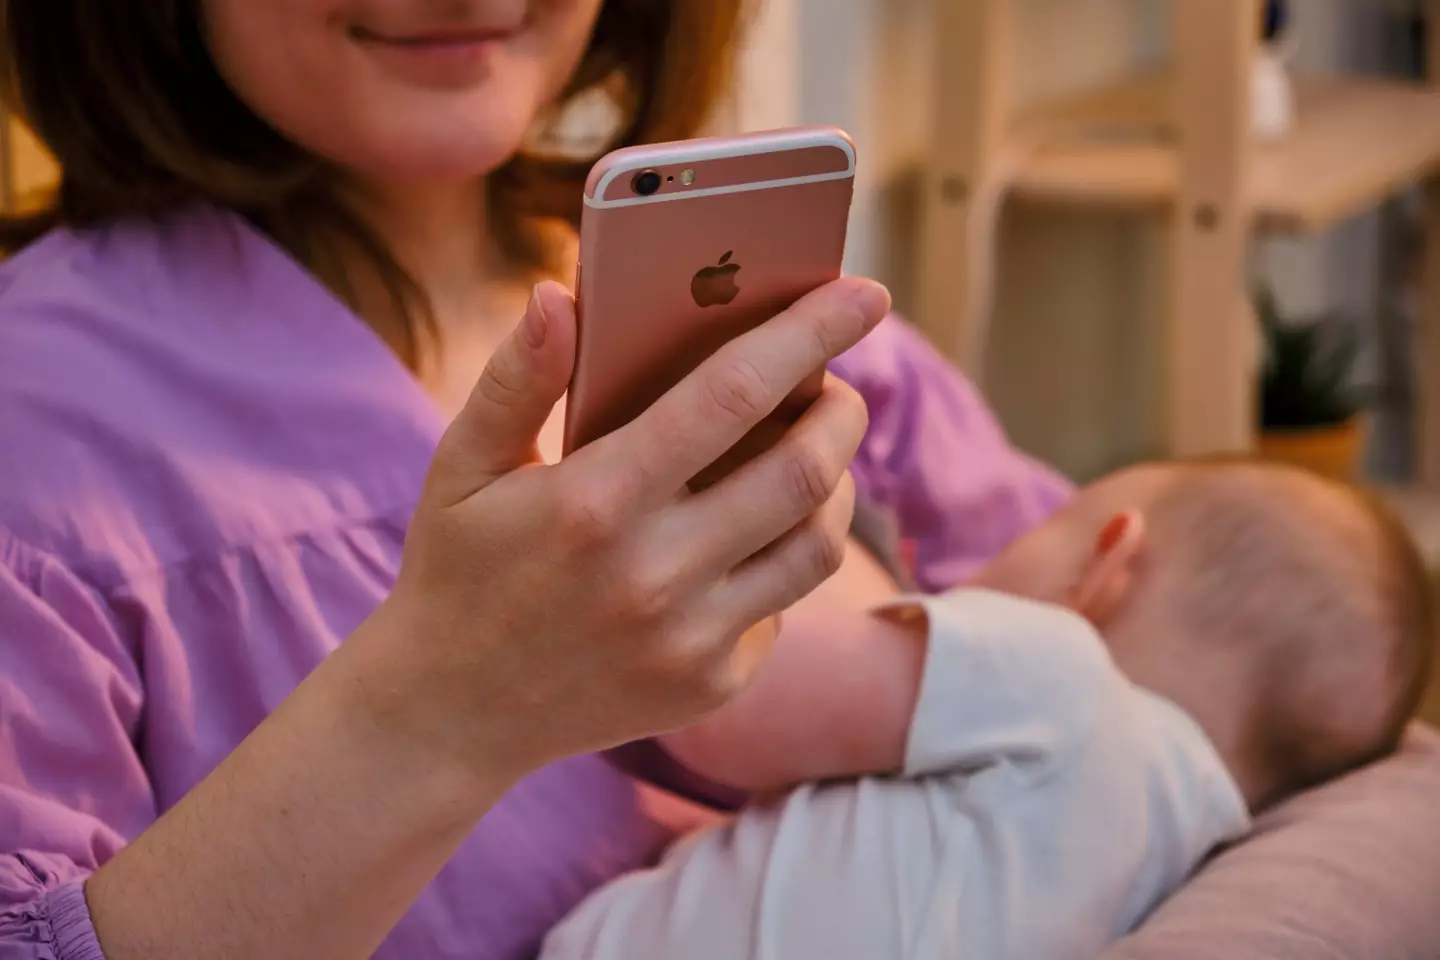 You can use sound recognition on your iPhone to hear your baby crying (